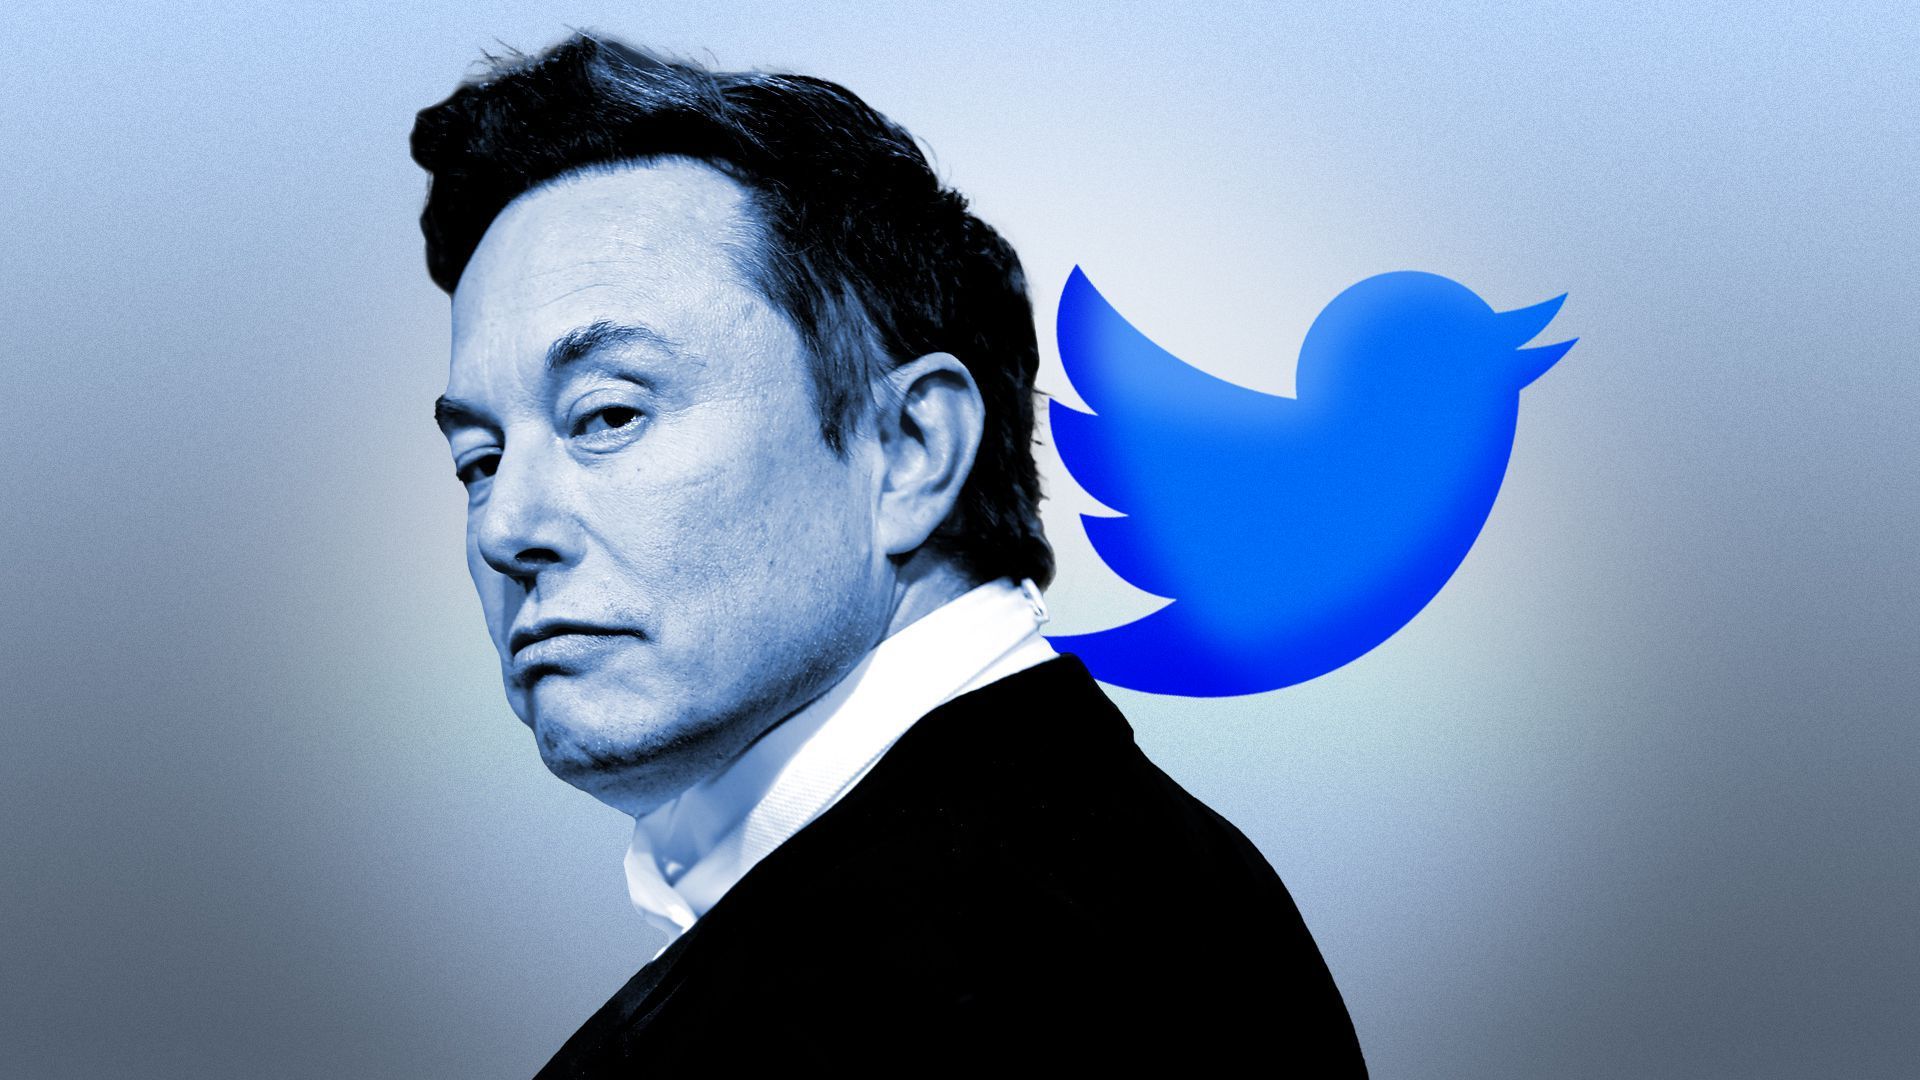 An illustration of Elon Musk and the Twitter logo.